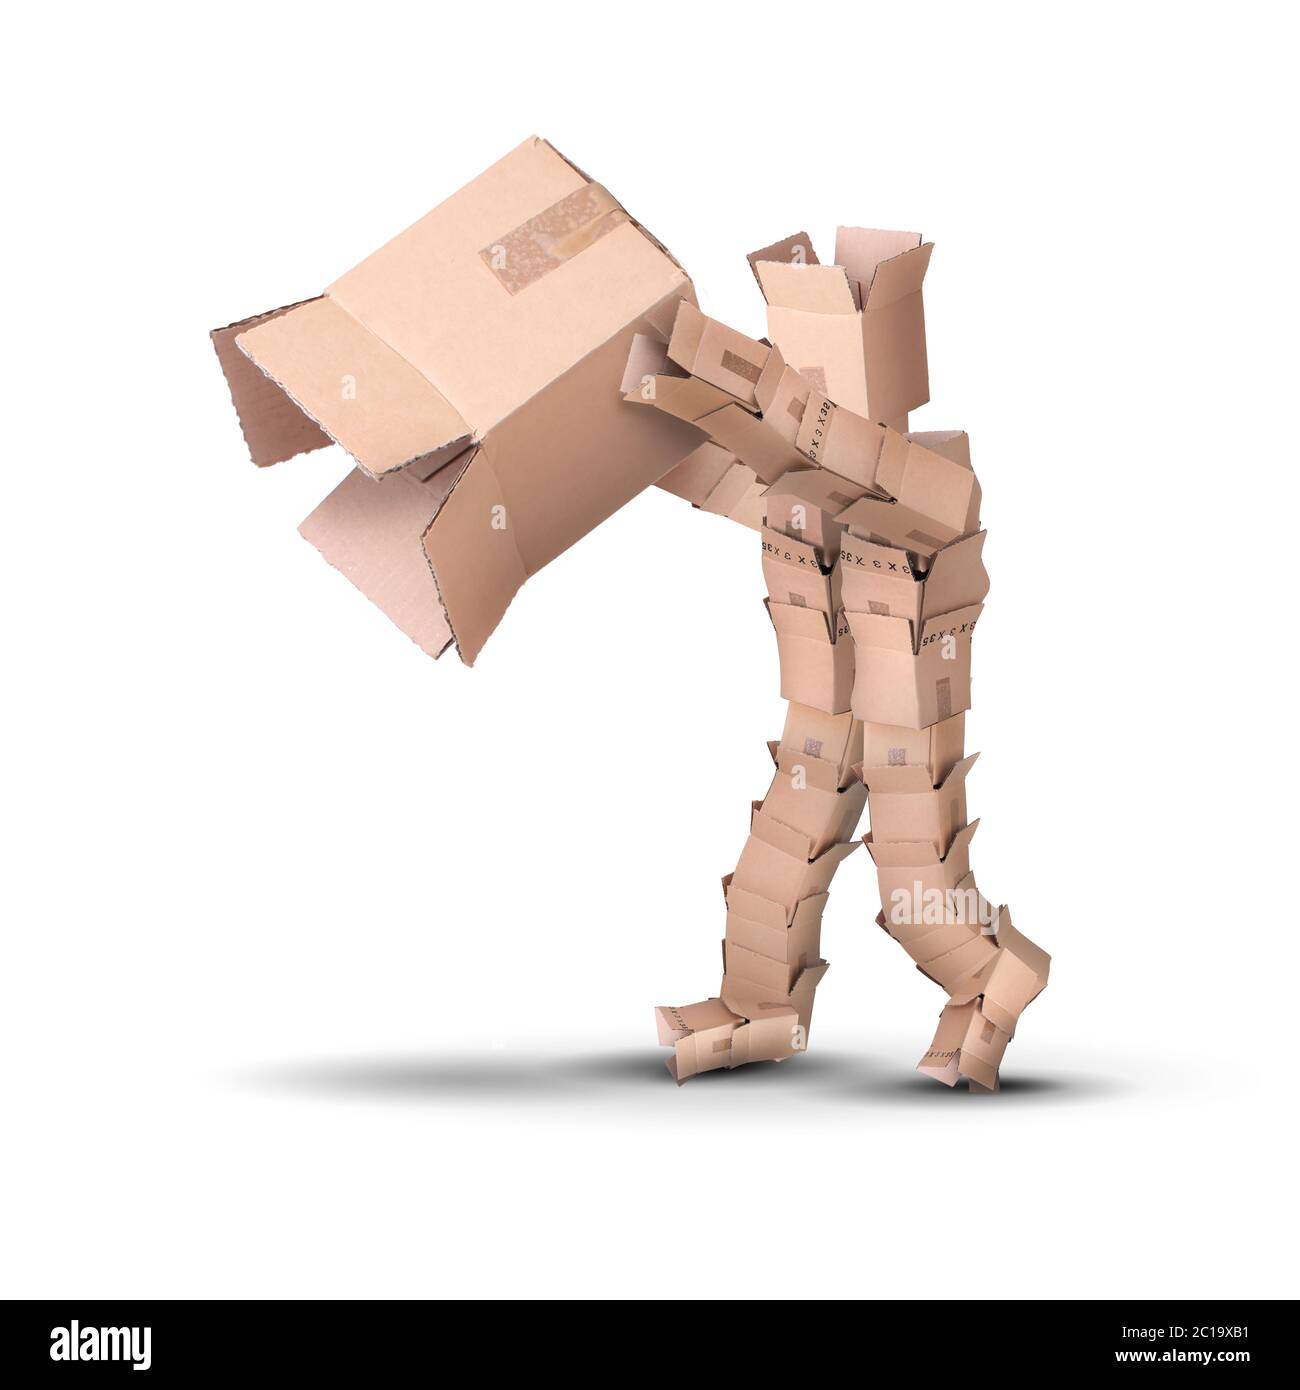 Thinking outside the box concept with a character made from boxes holding a large empty carton. Stock Photo